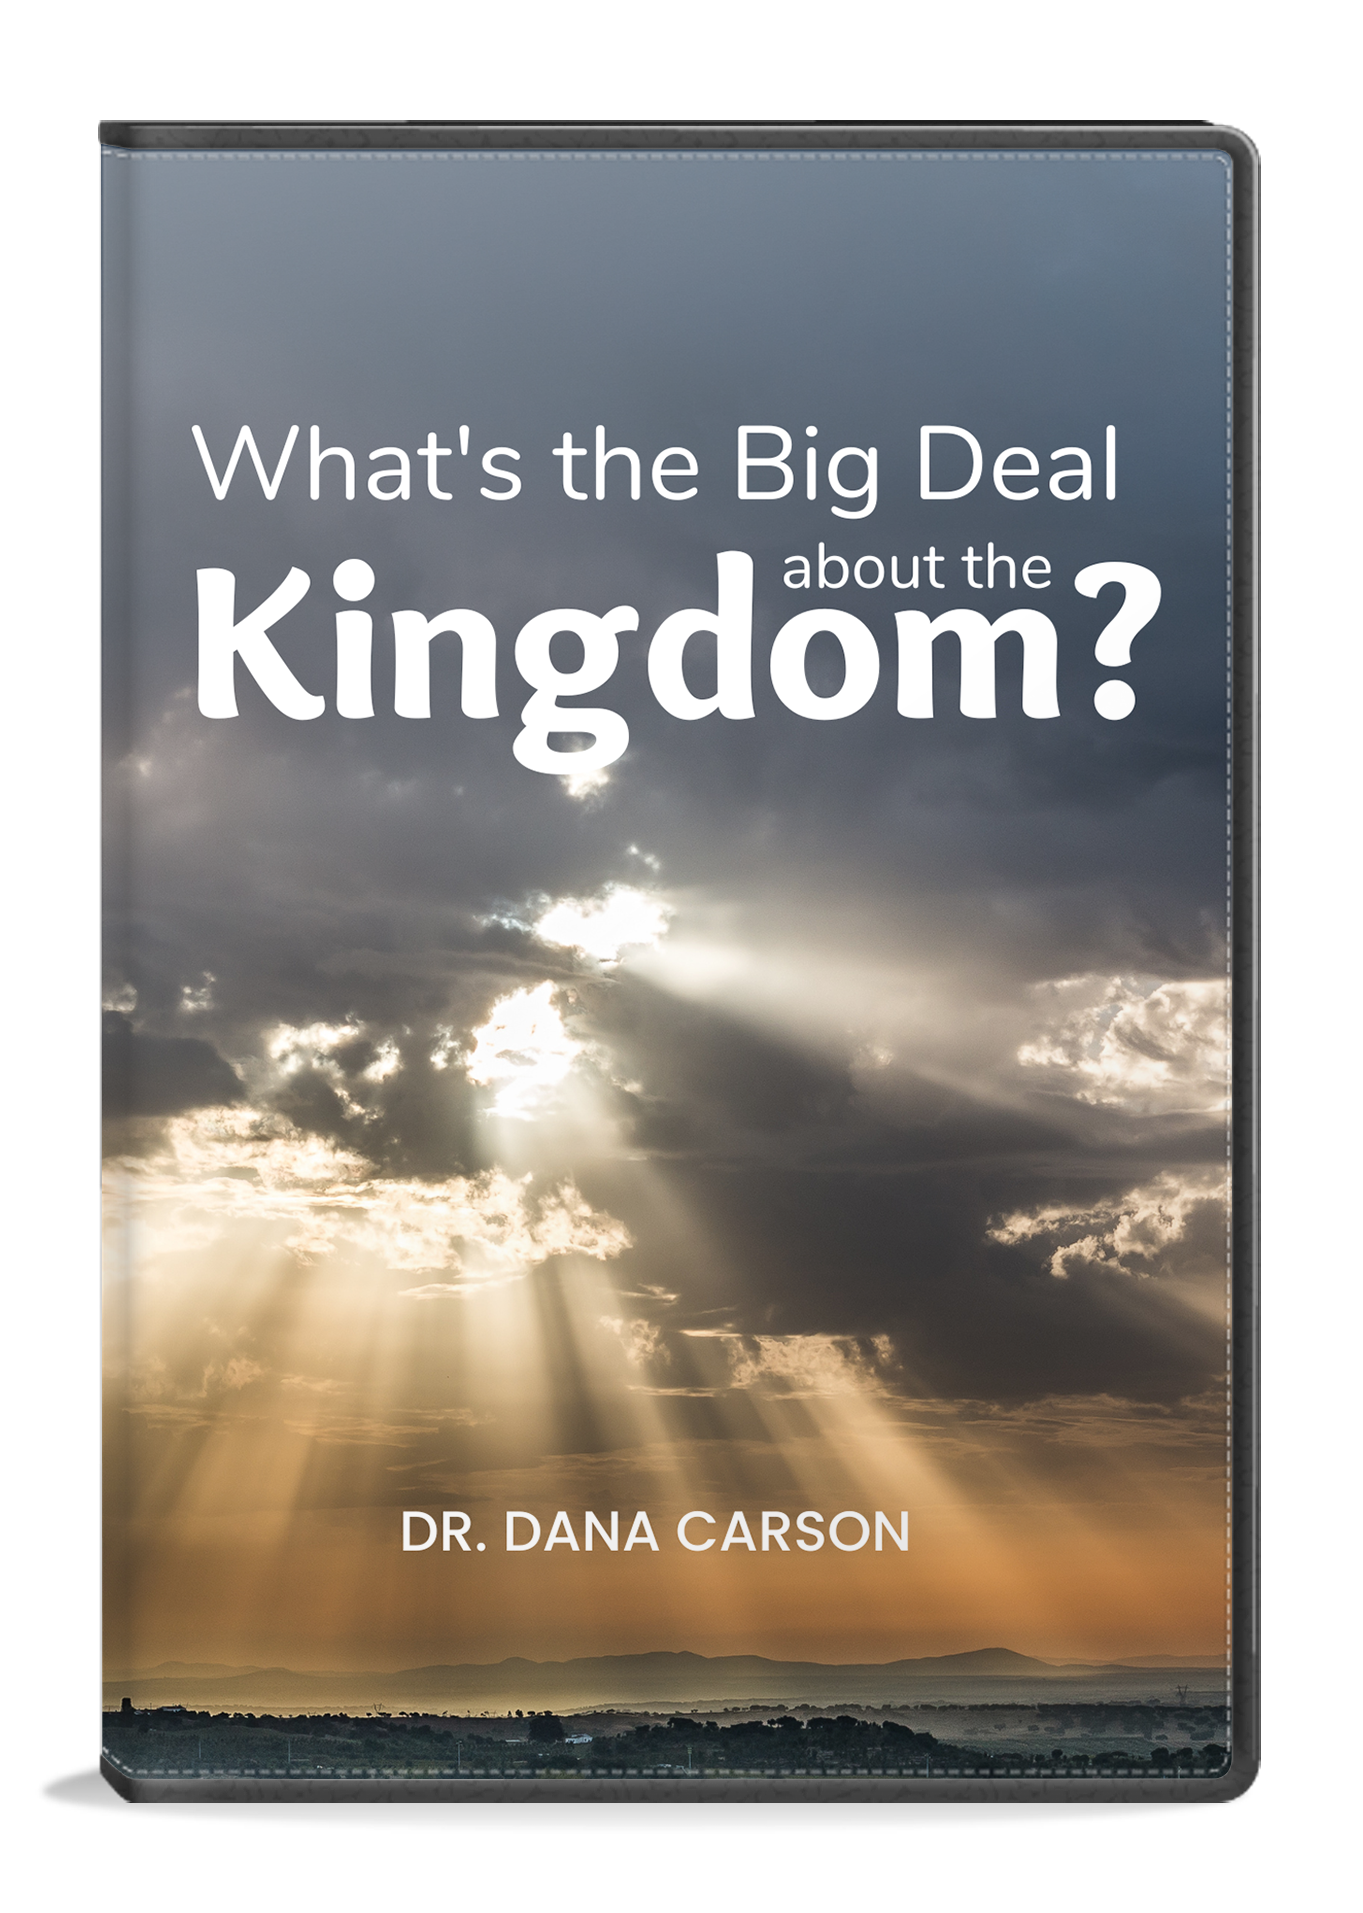 What’s the Big Deal About the Kingdom?